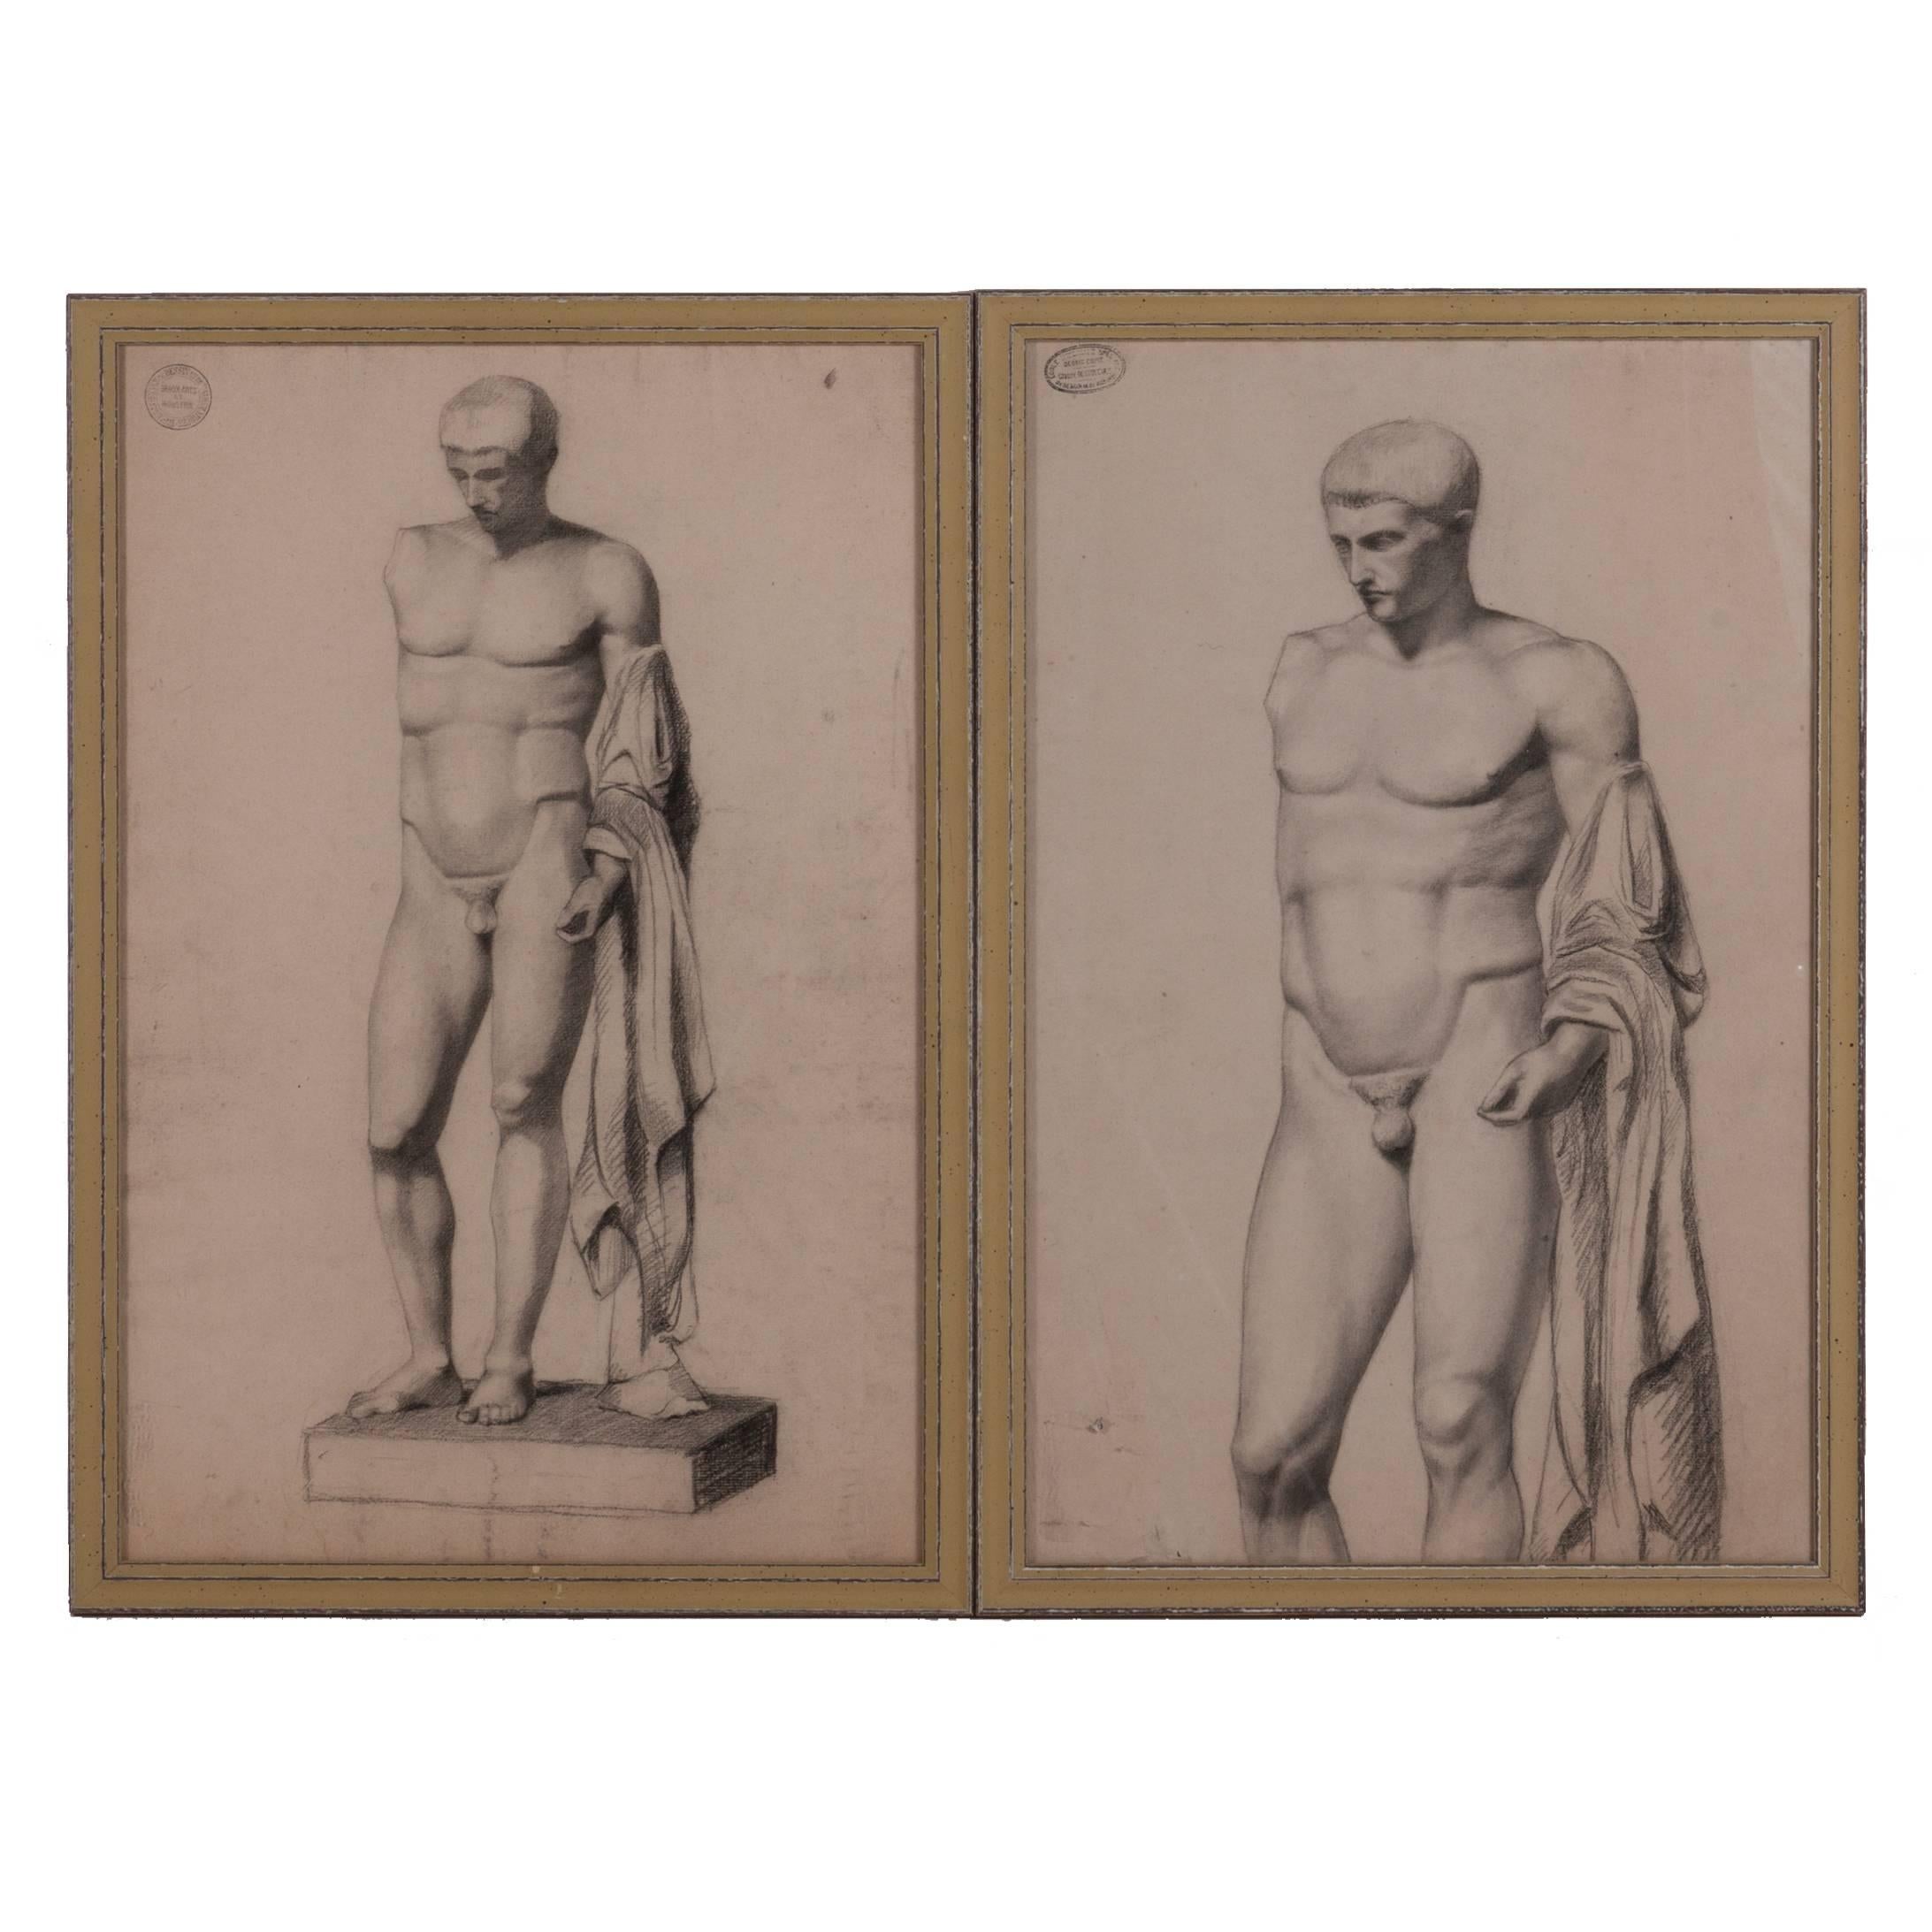 A Pair of Charcoal Drawings of a Sculpture of a Male Nude 